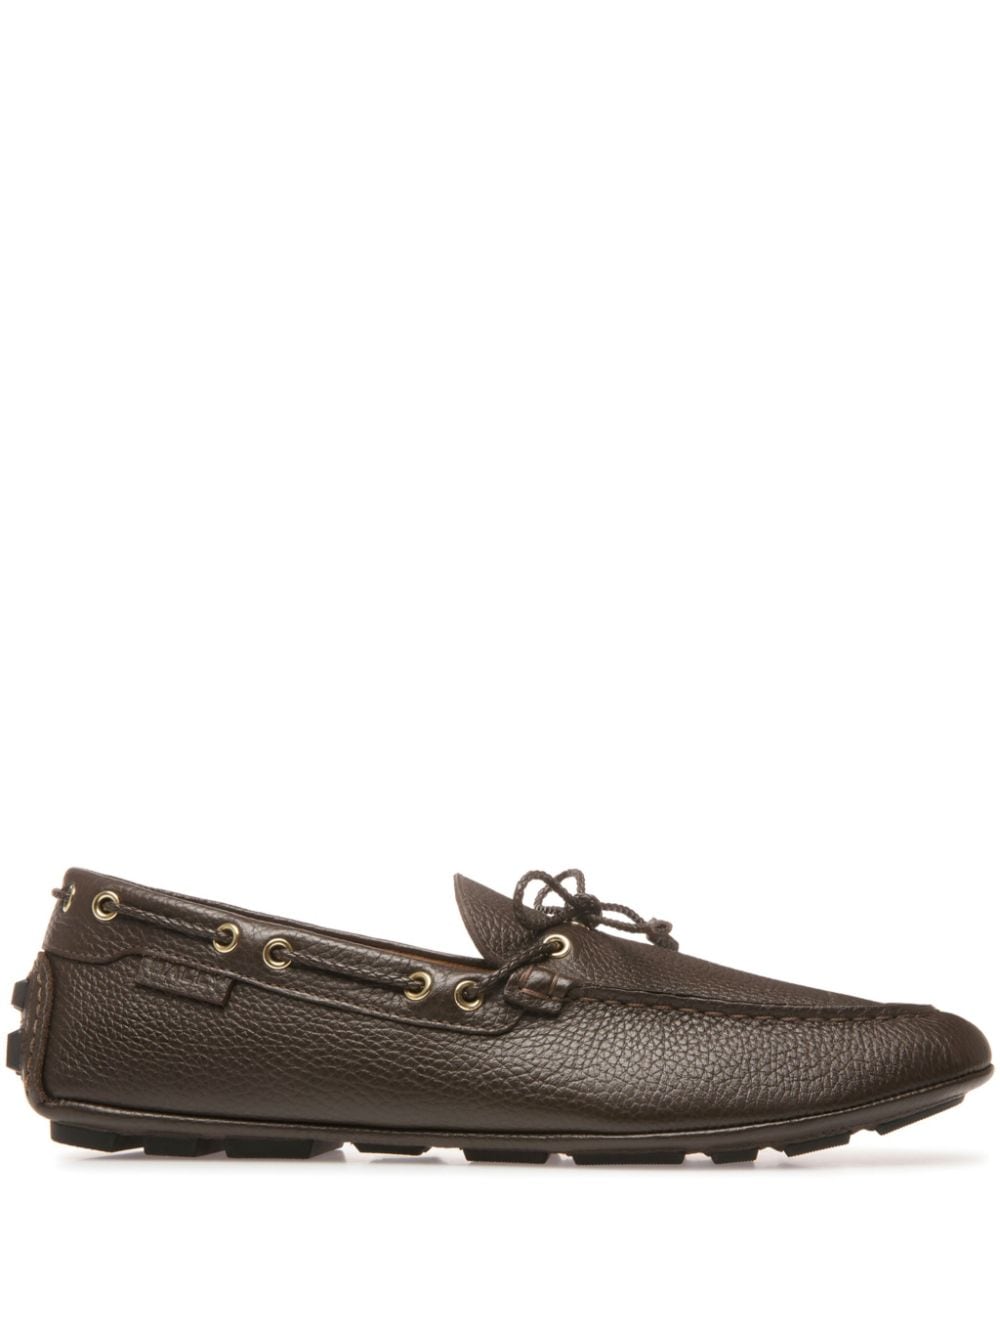 Bally Kyan grained-texture boat shoes - Brown von Bally